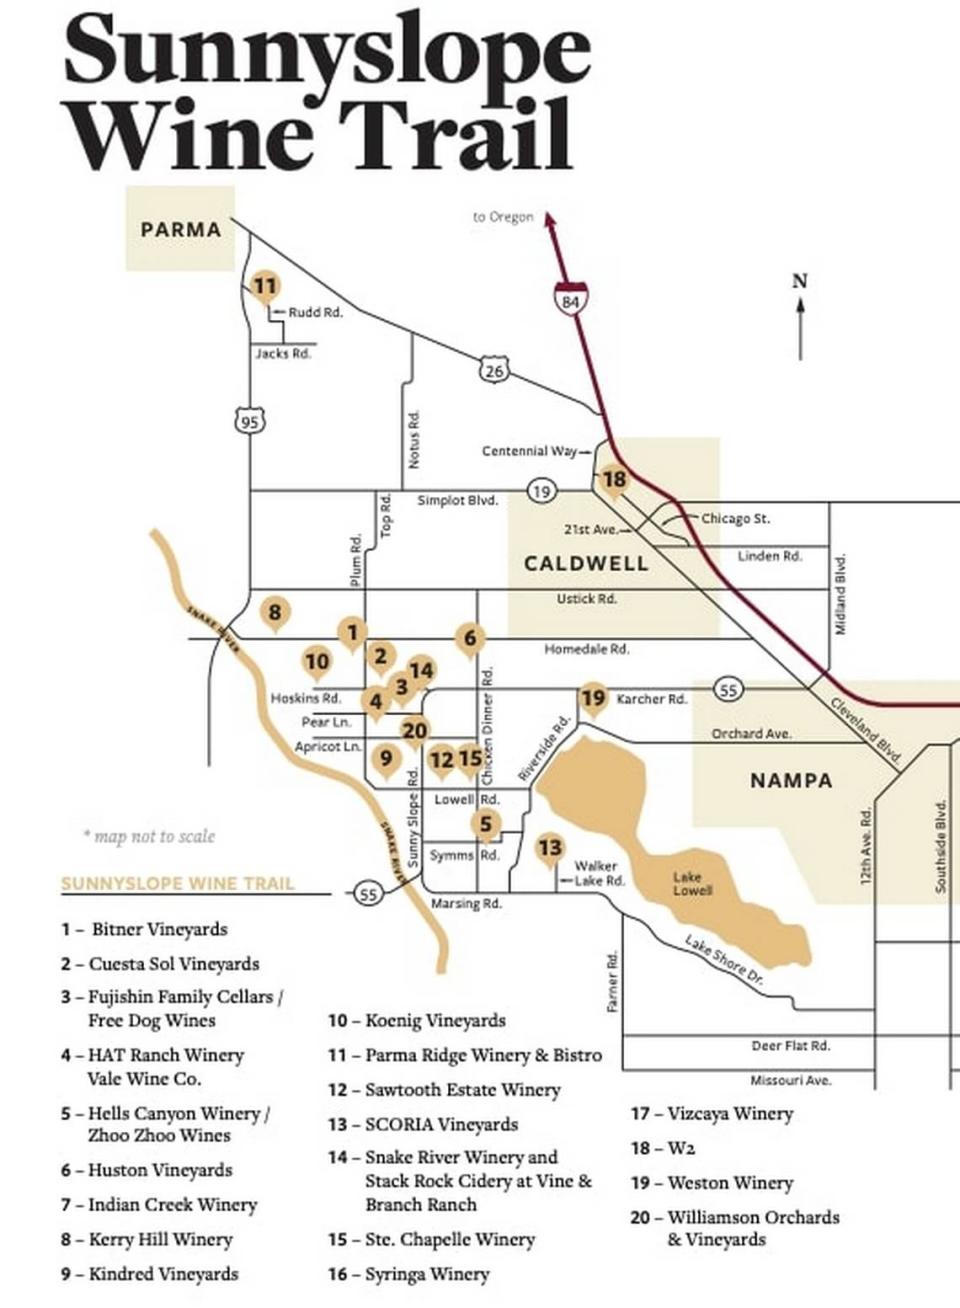 A map of the Sunnyslope Wine Trail, a list of 20 wineries across the Sunnyslope region.